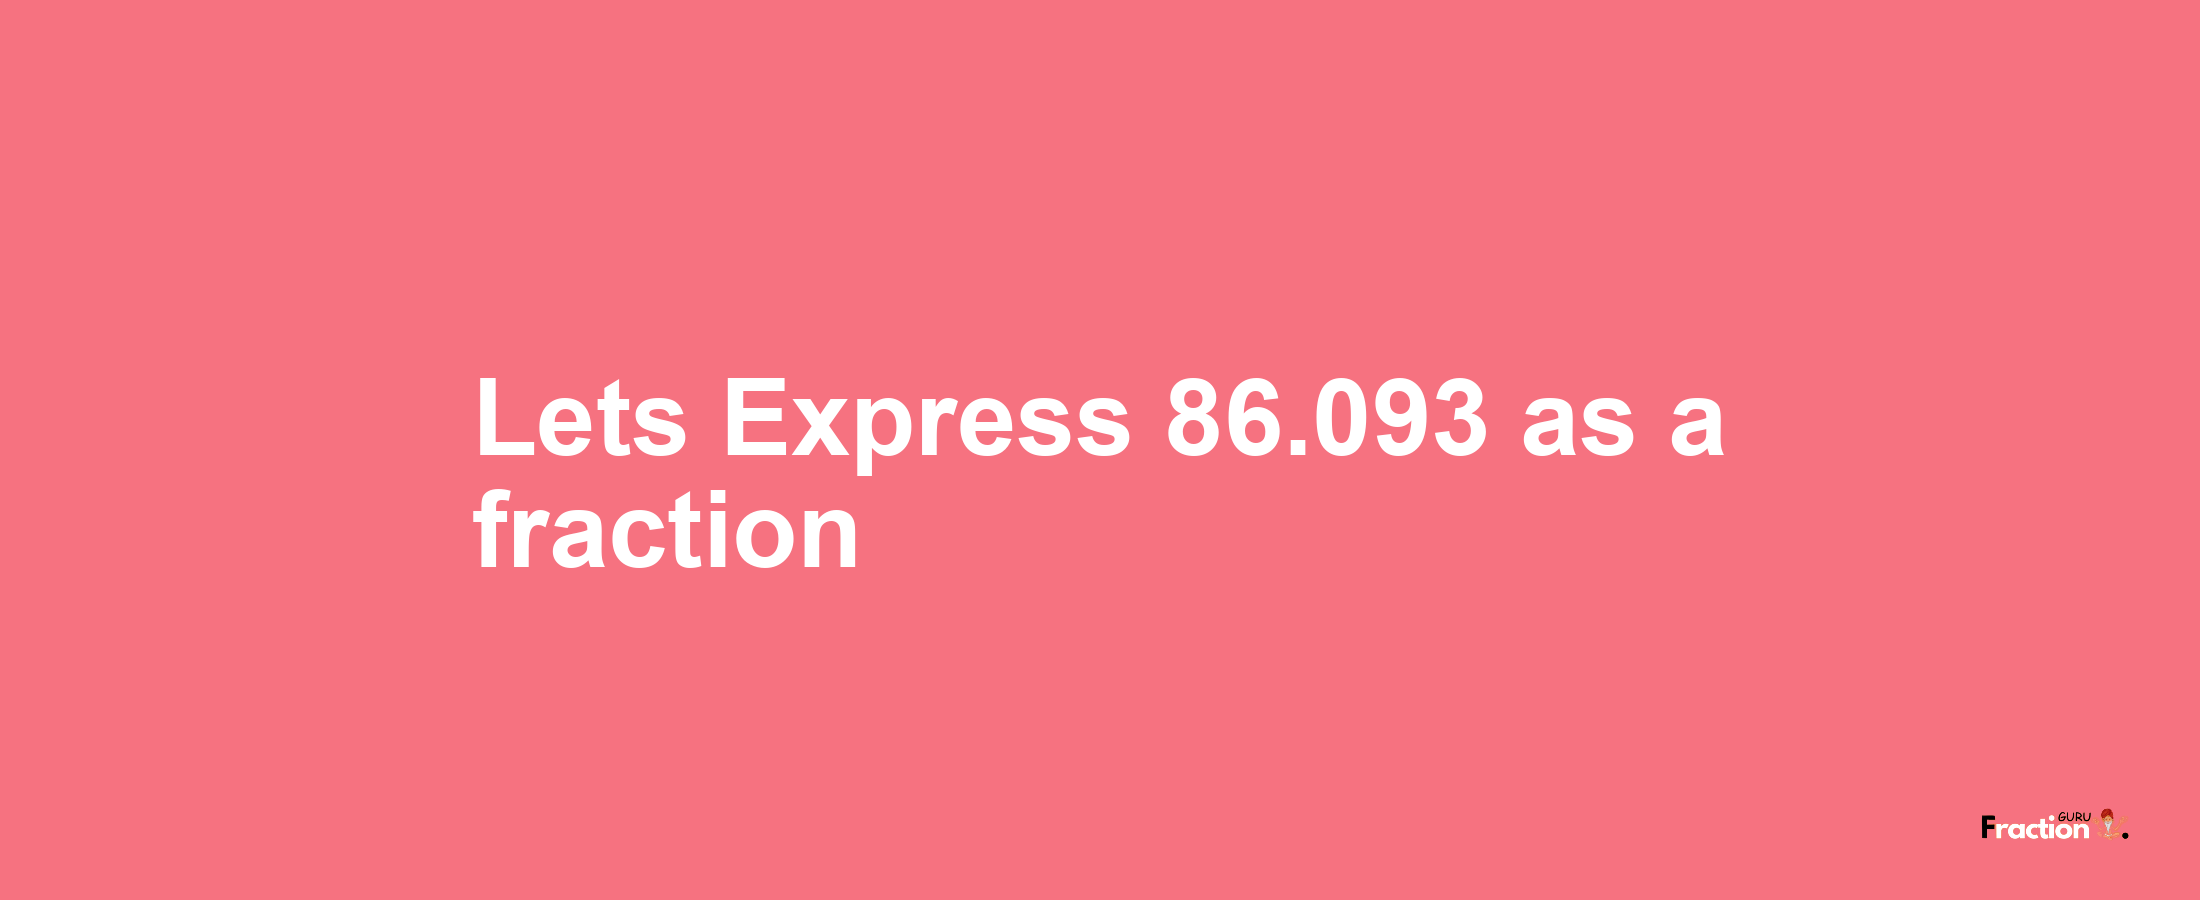 Lets Express 86.093 as afraction